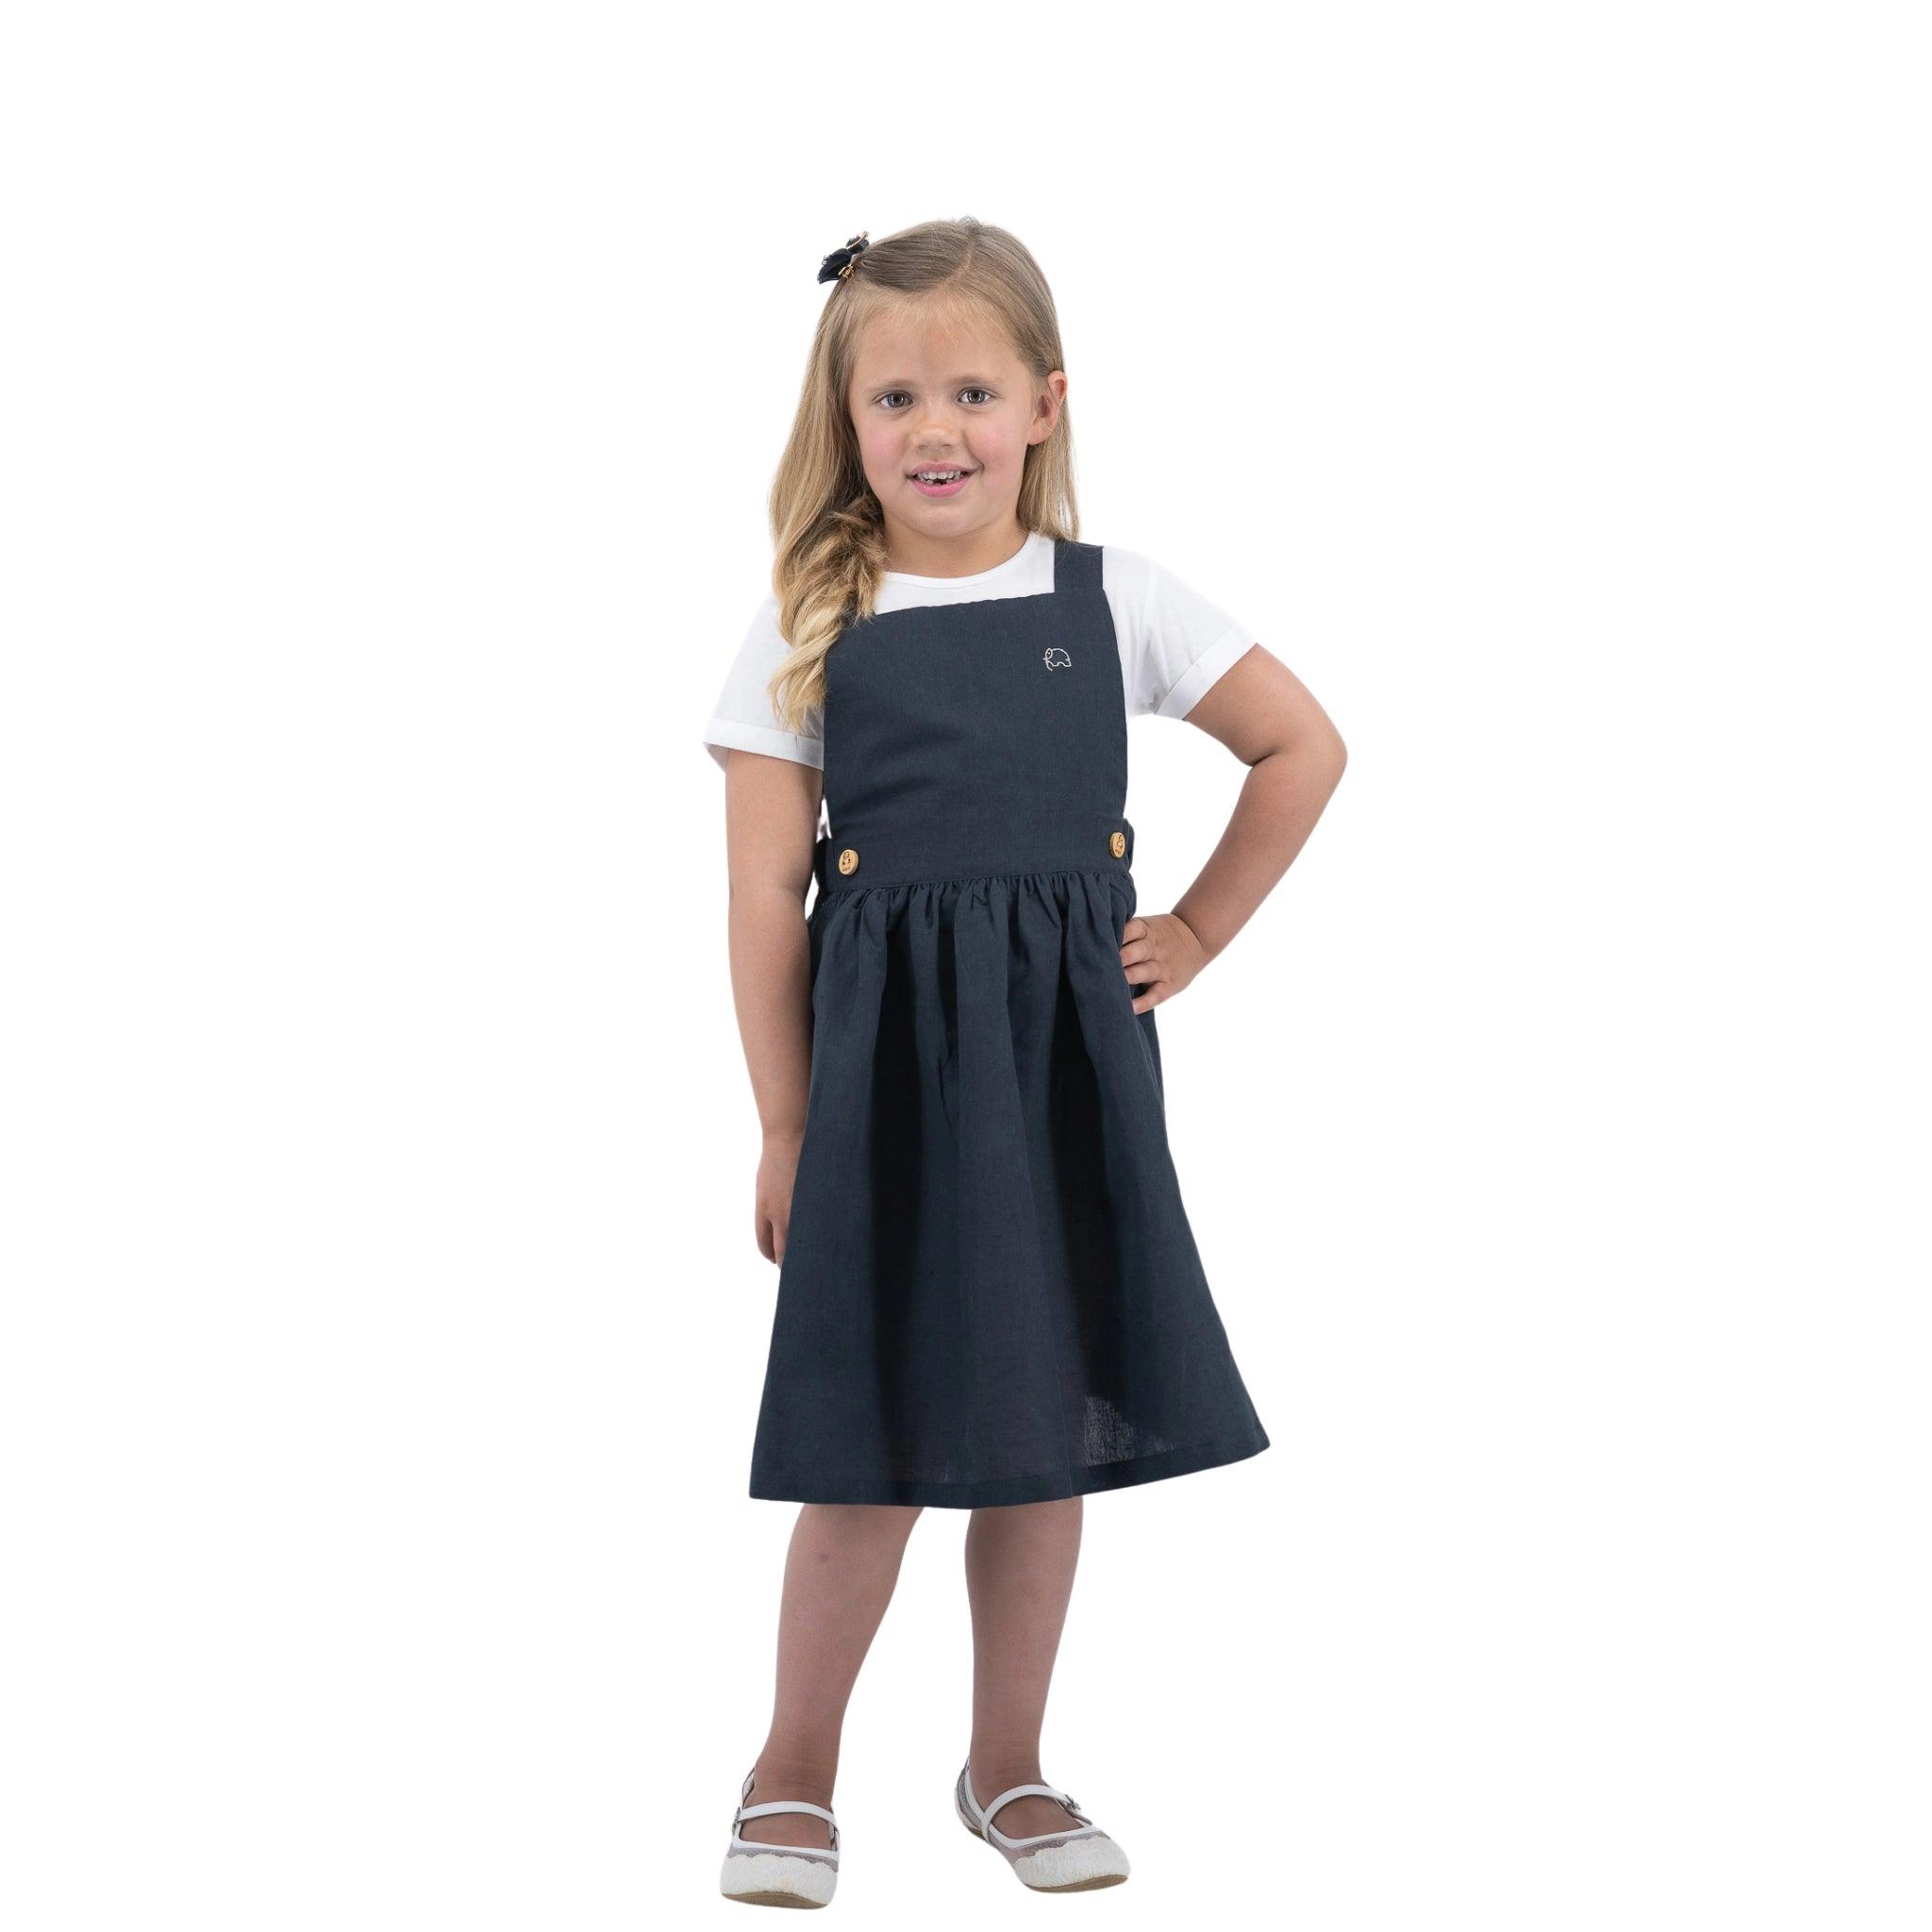 A young girl with blonde hair stands confidently, wearing a Karee Ebony Black Linen Pinafore dress over a white shirt, matched with white shoes.